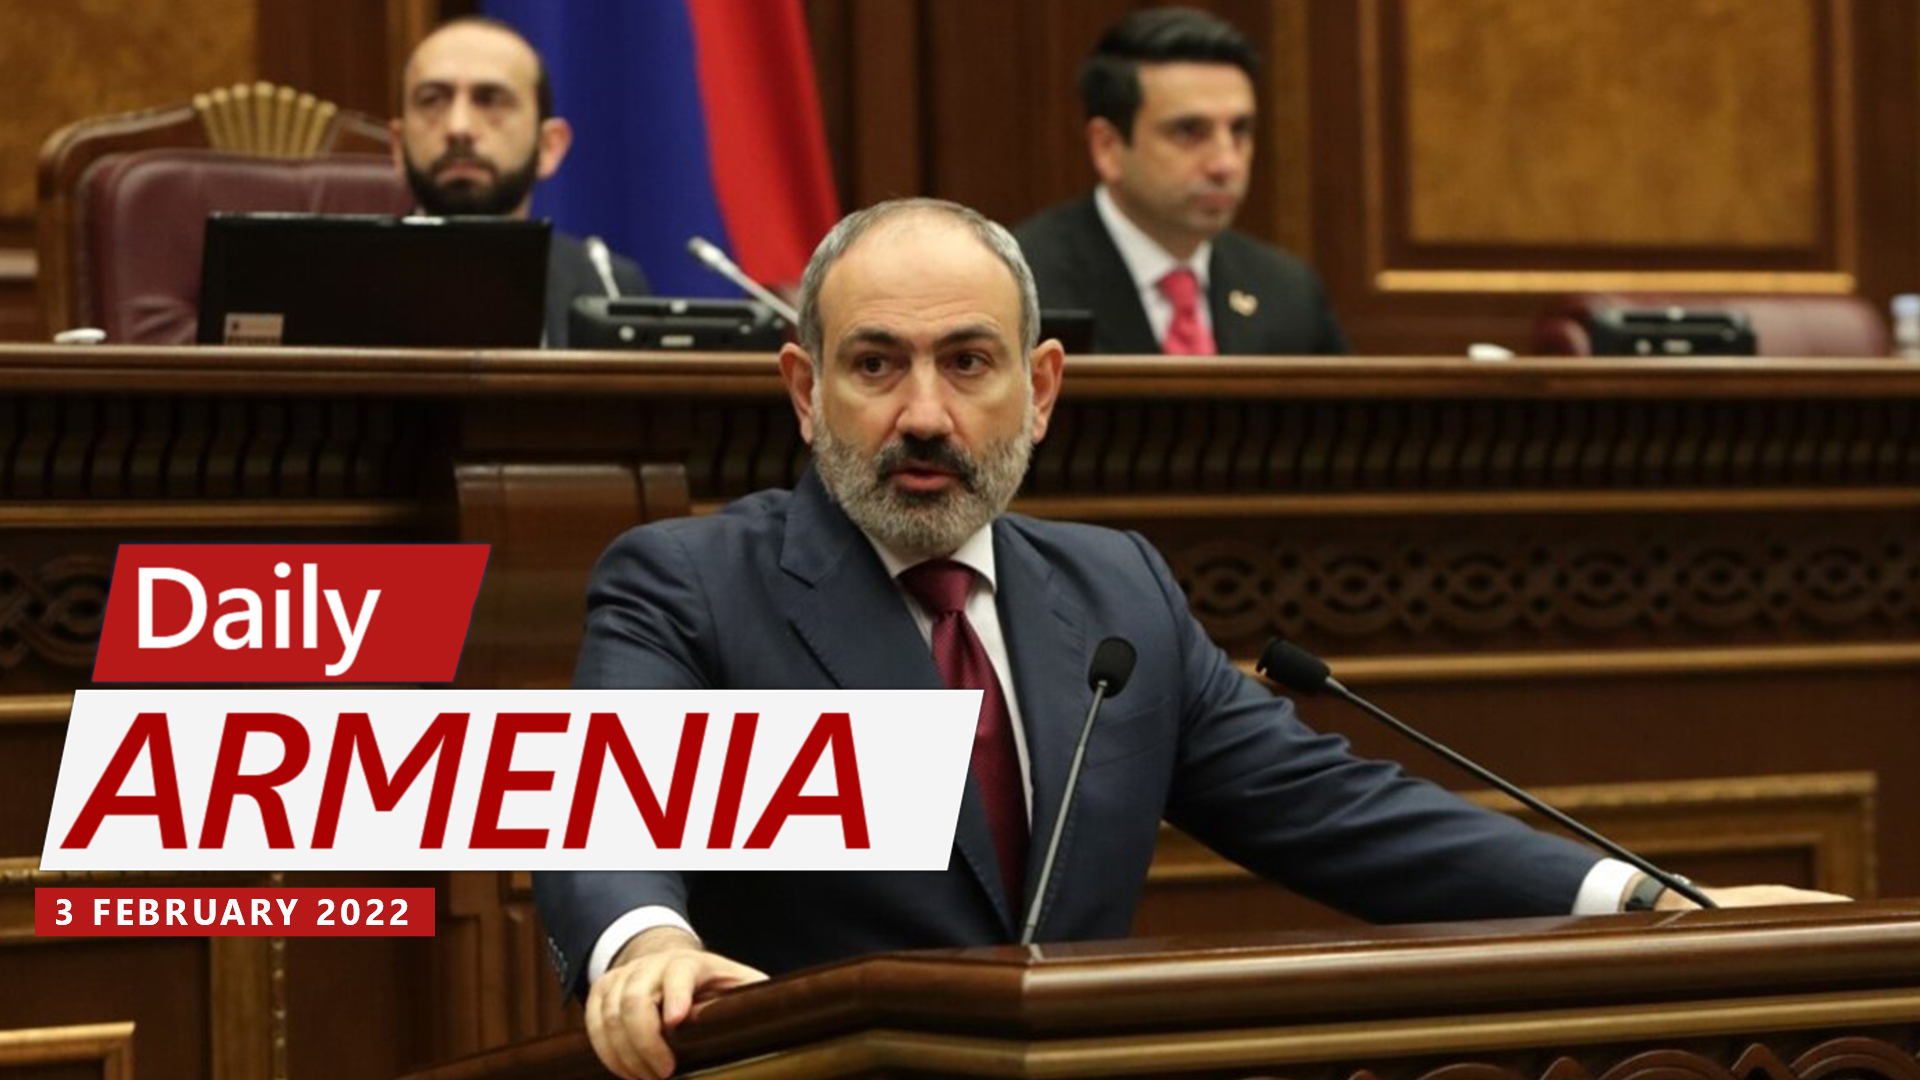 Pashinyan’s approval rating continues to plummet, according to new poll